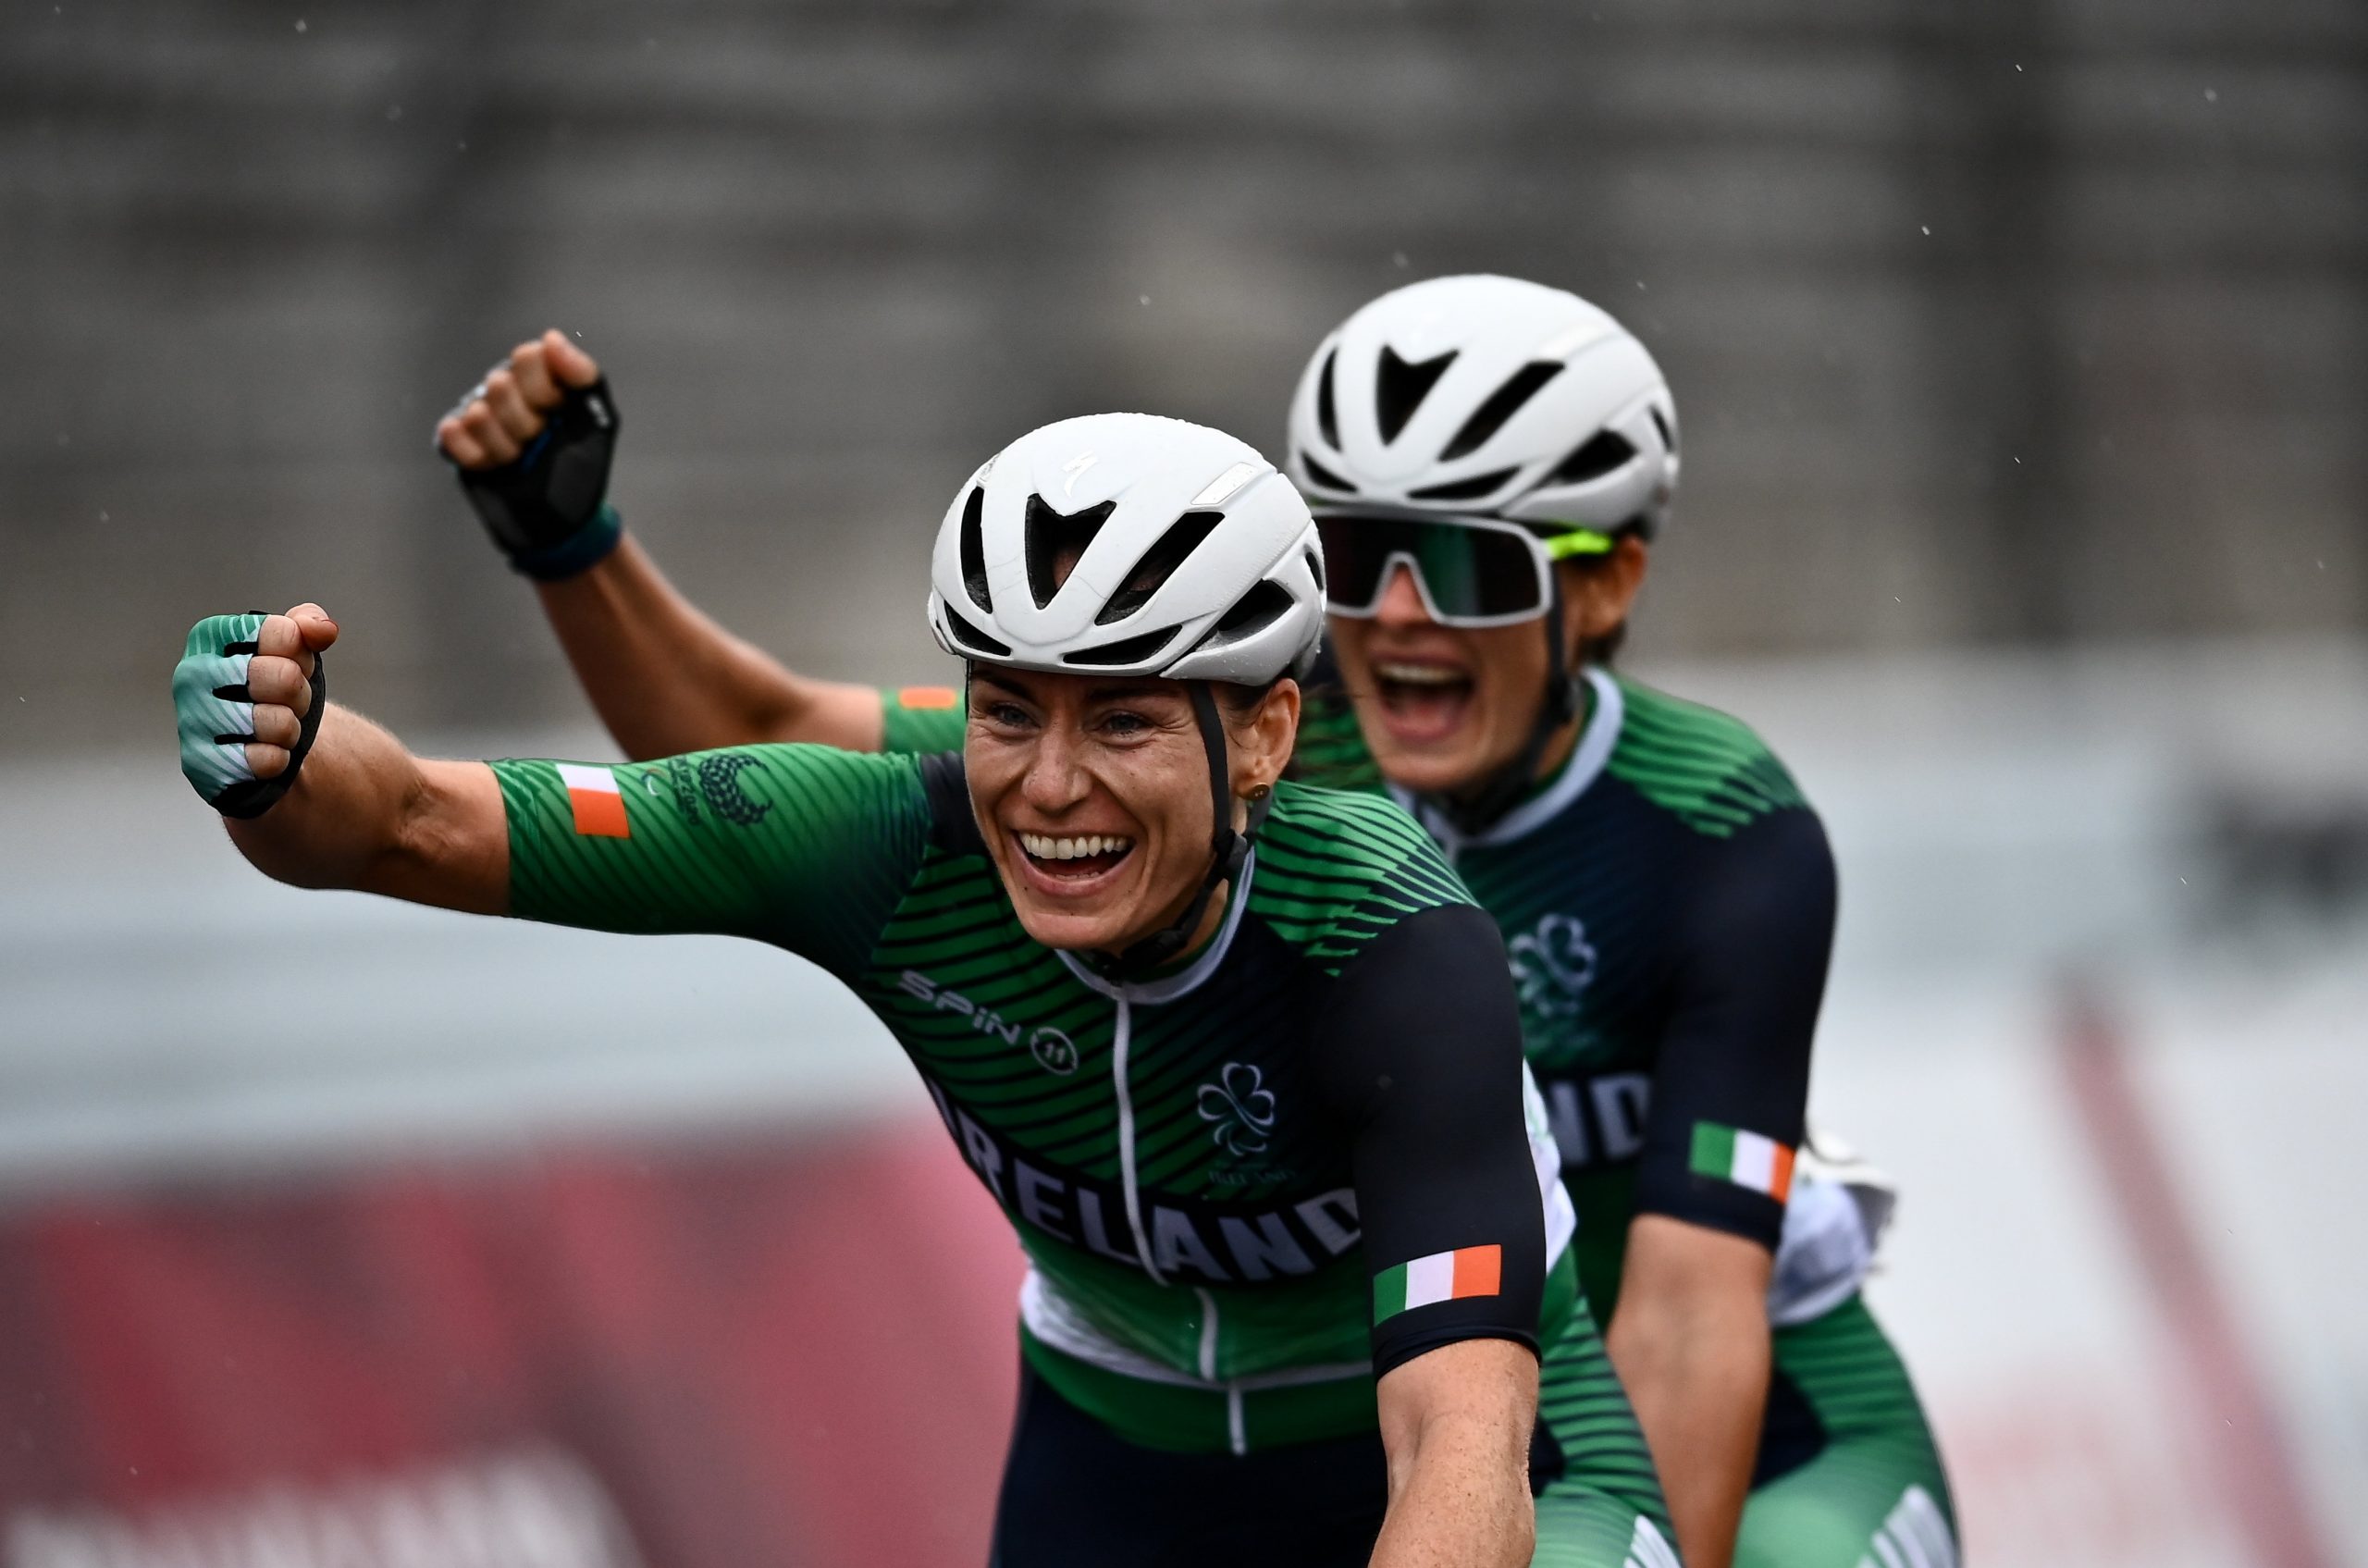 3 September 2021; Eve McCrystal, pilot, and Katie George Dunlevy, stoker, of Ireland celebrate winning gold as they cross the line in the Women's B road race at the Fuji International Speedway on day ten during the 2020 Tokyo Summer Olympic Games in Shizuoka, Japan. Photo by David Fitzgerald/Sportsfile *** NO REPRODUCTION FEE ***